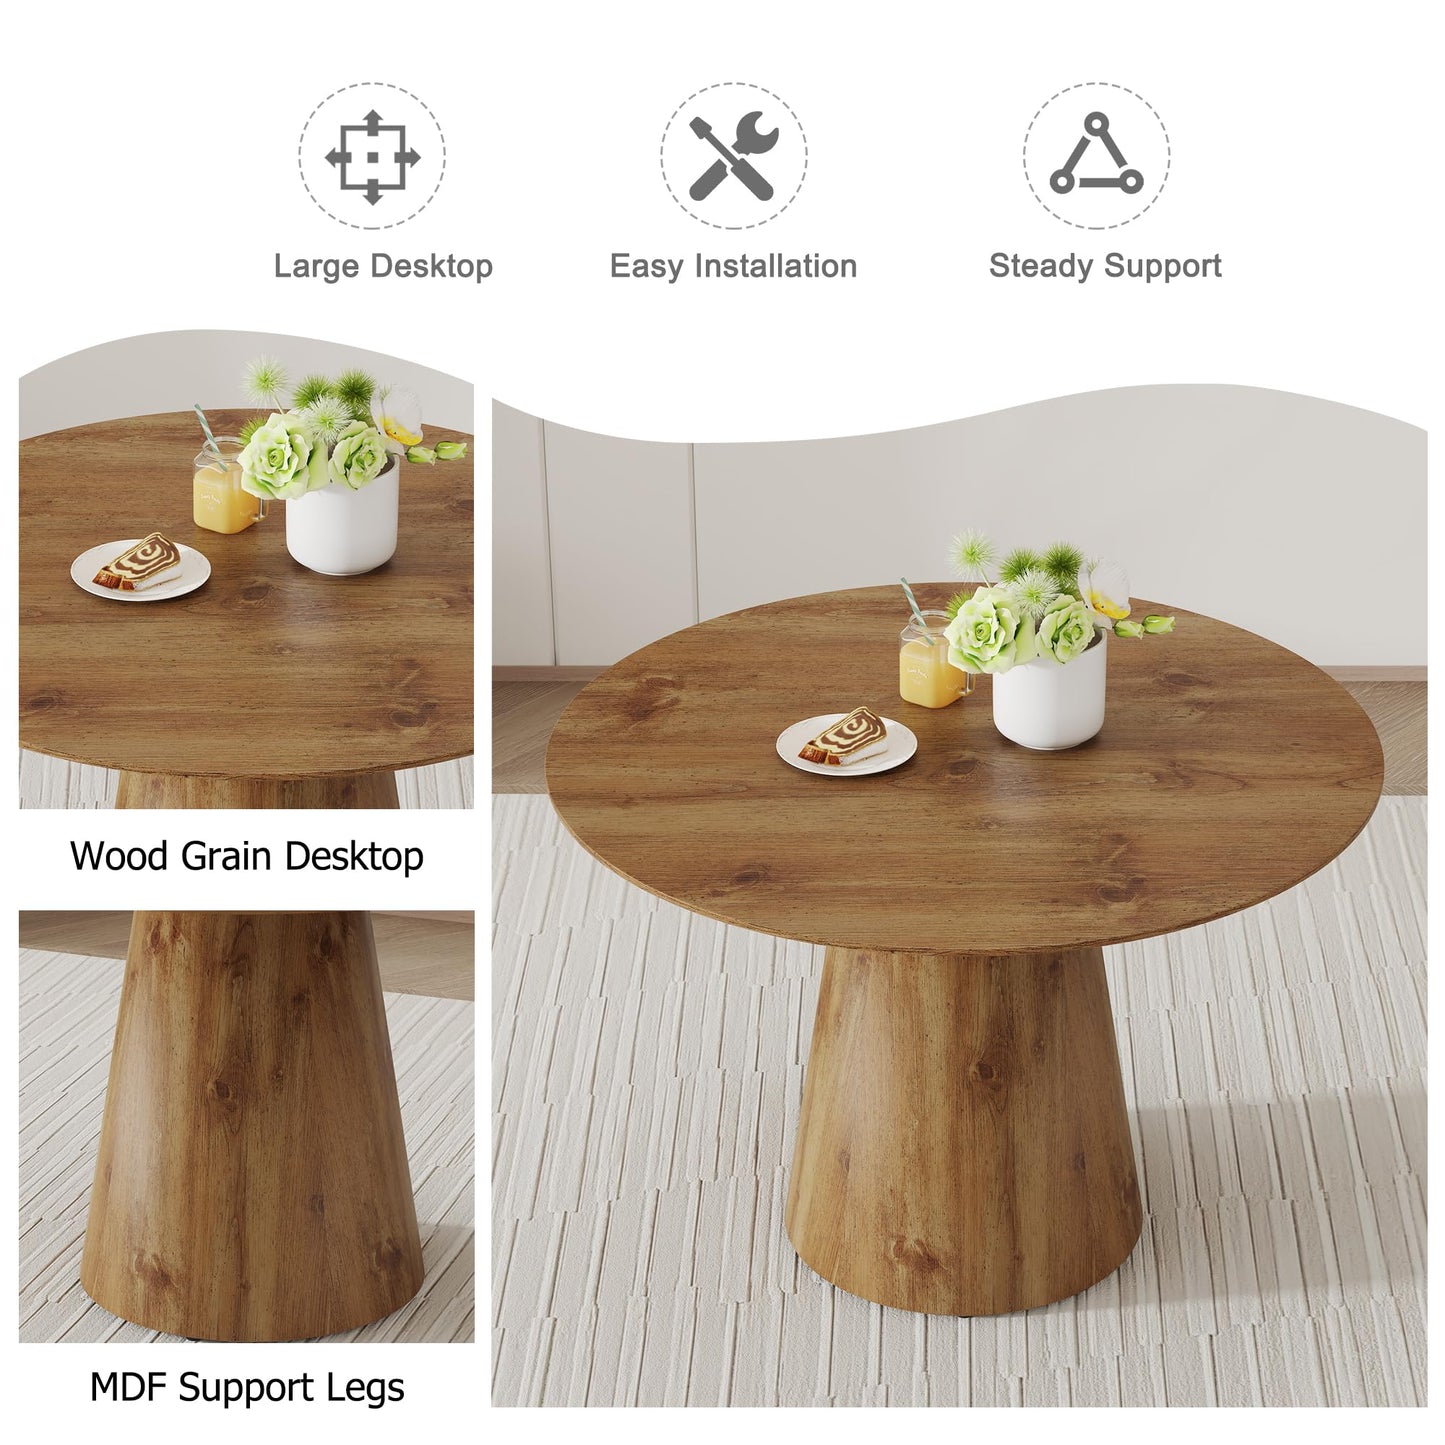 5 Piece Round Dining Table Set, Modern Kitchen Table and Chairs Set for 4, Wooden Table with 2.4-inch Thick Tabletop&4 Mid Century Upholstered Chairs with Soft Linen Fabric Cushion Seat&Metal Legs.